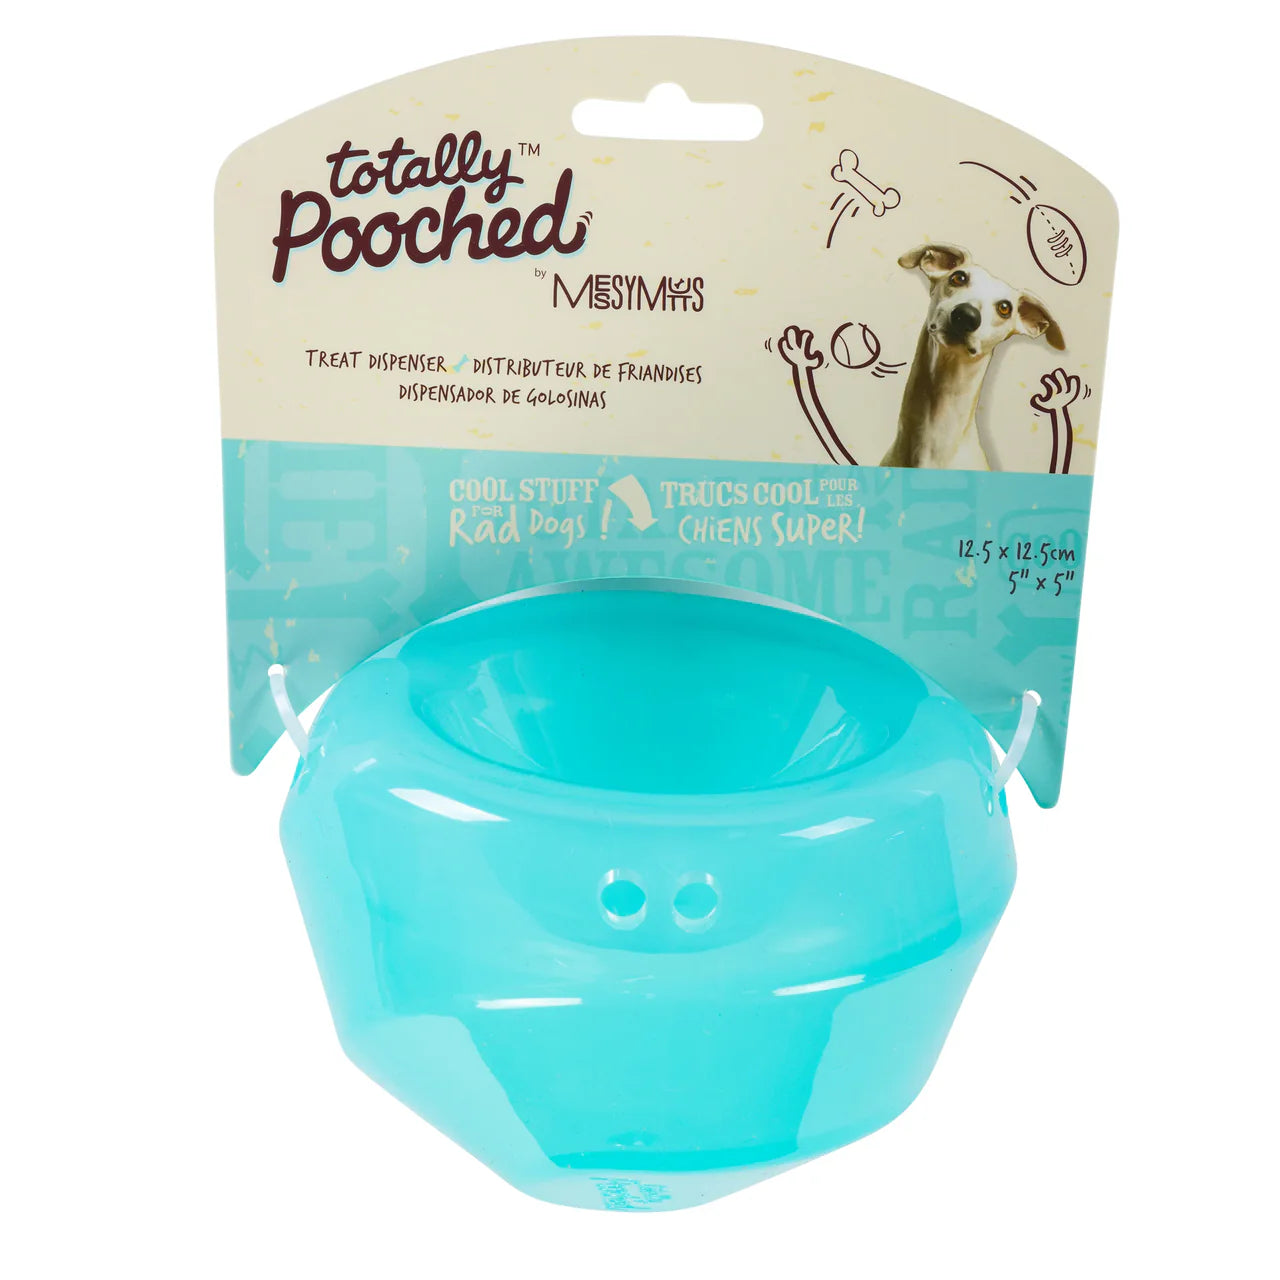 Totally Pooched - Stuff'n Wobble Ball, 5", Teal (For Dogs)